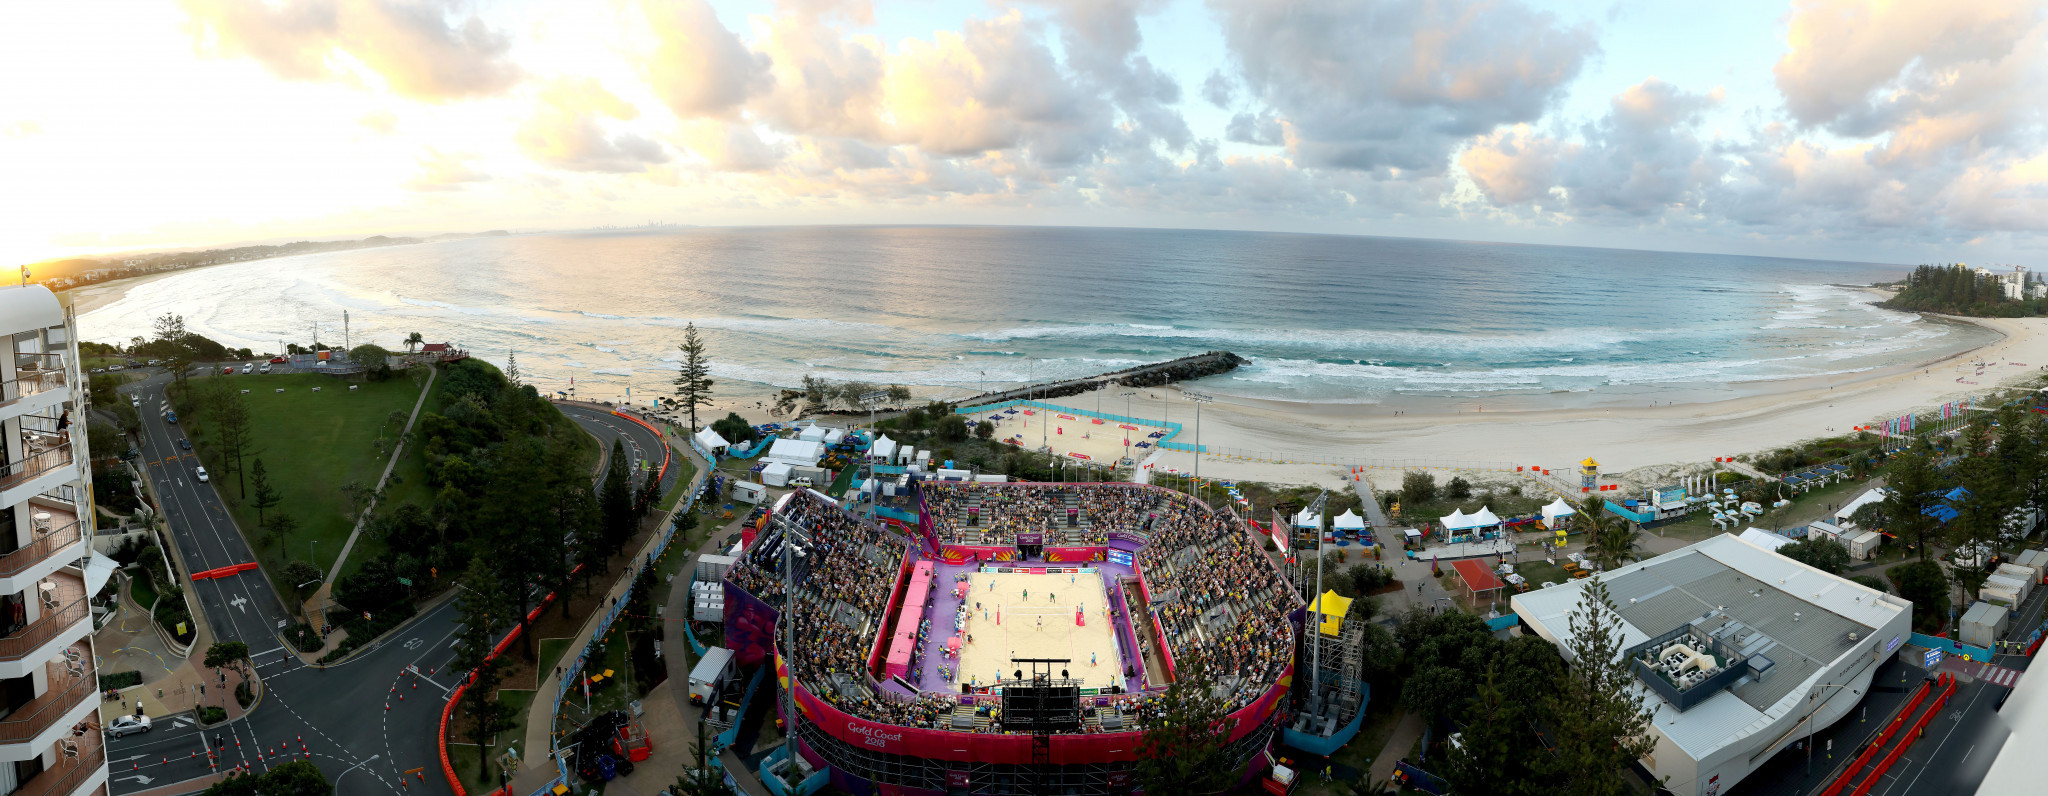 A general view of the beach volleyball stadium ©Getty Images